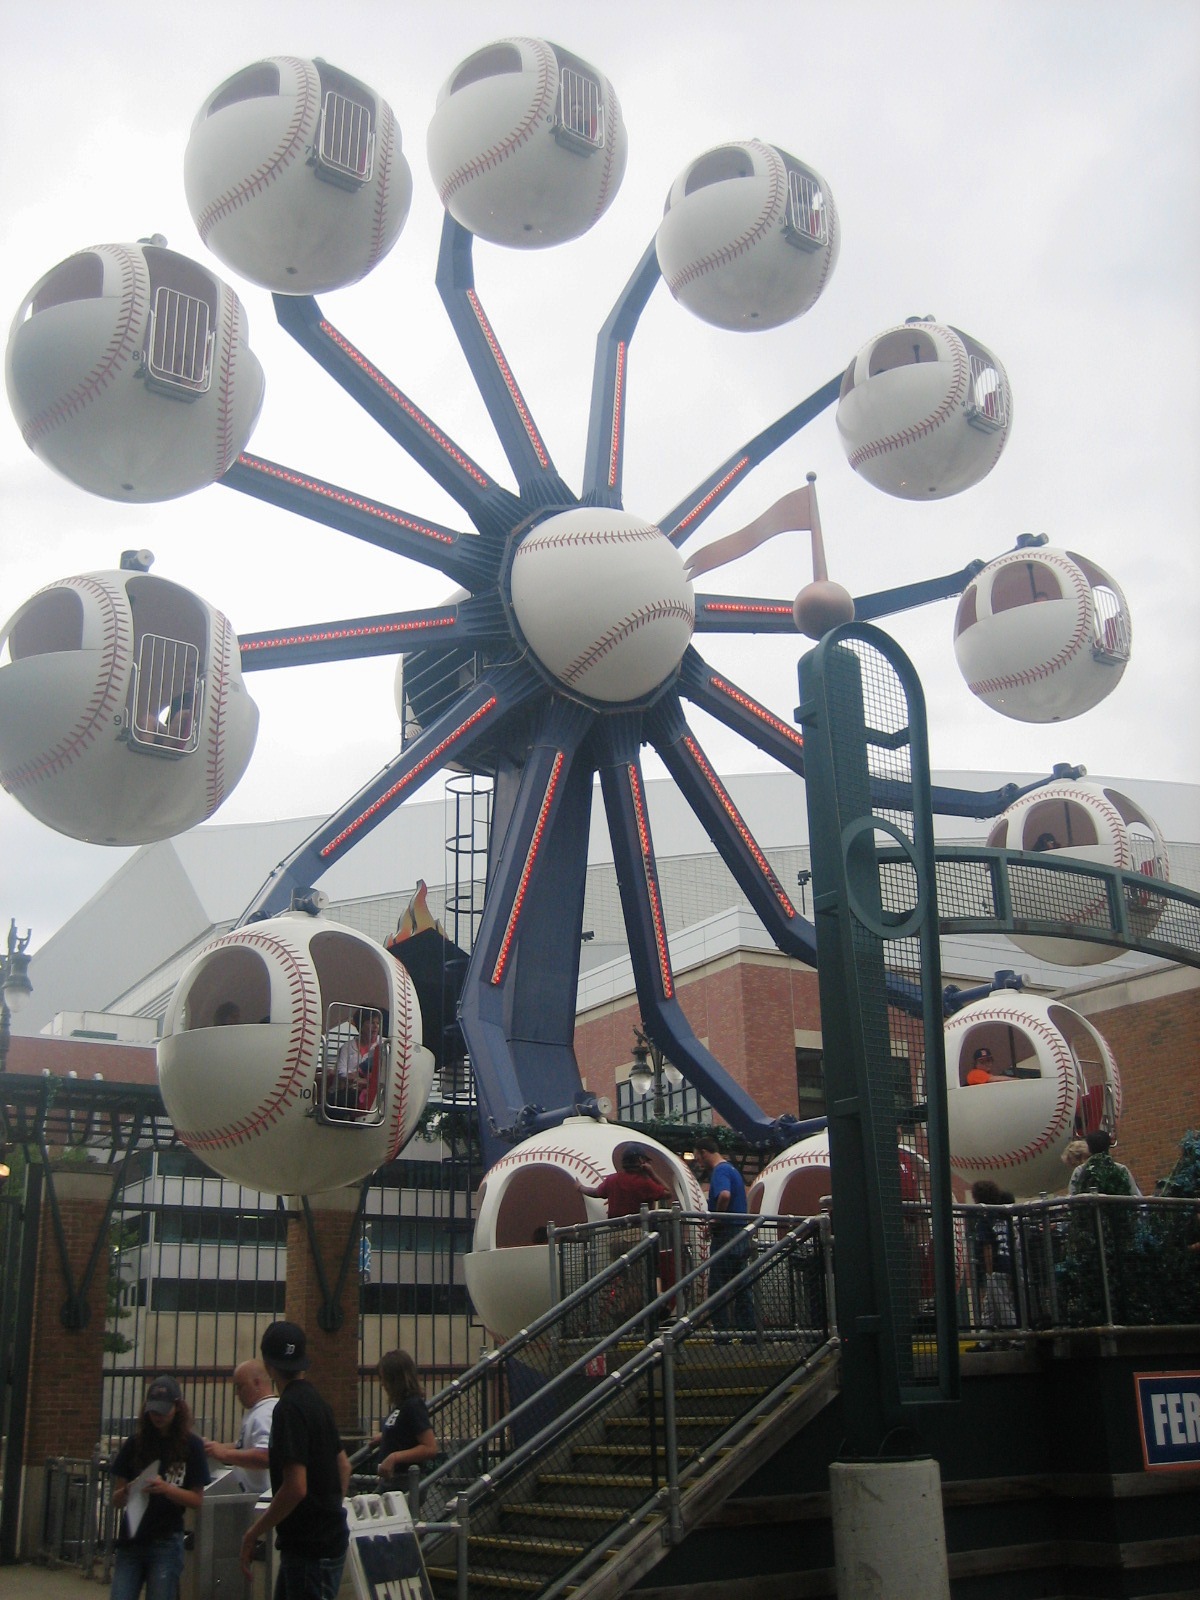 Detroit Tigers' Comerica Park includes a carousel and Ferris wheel.